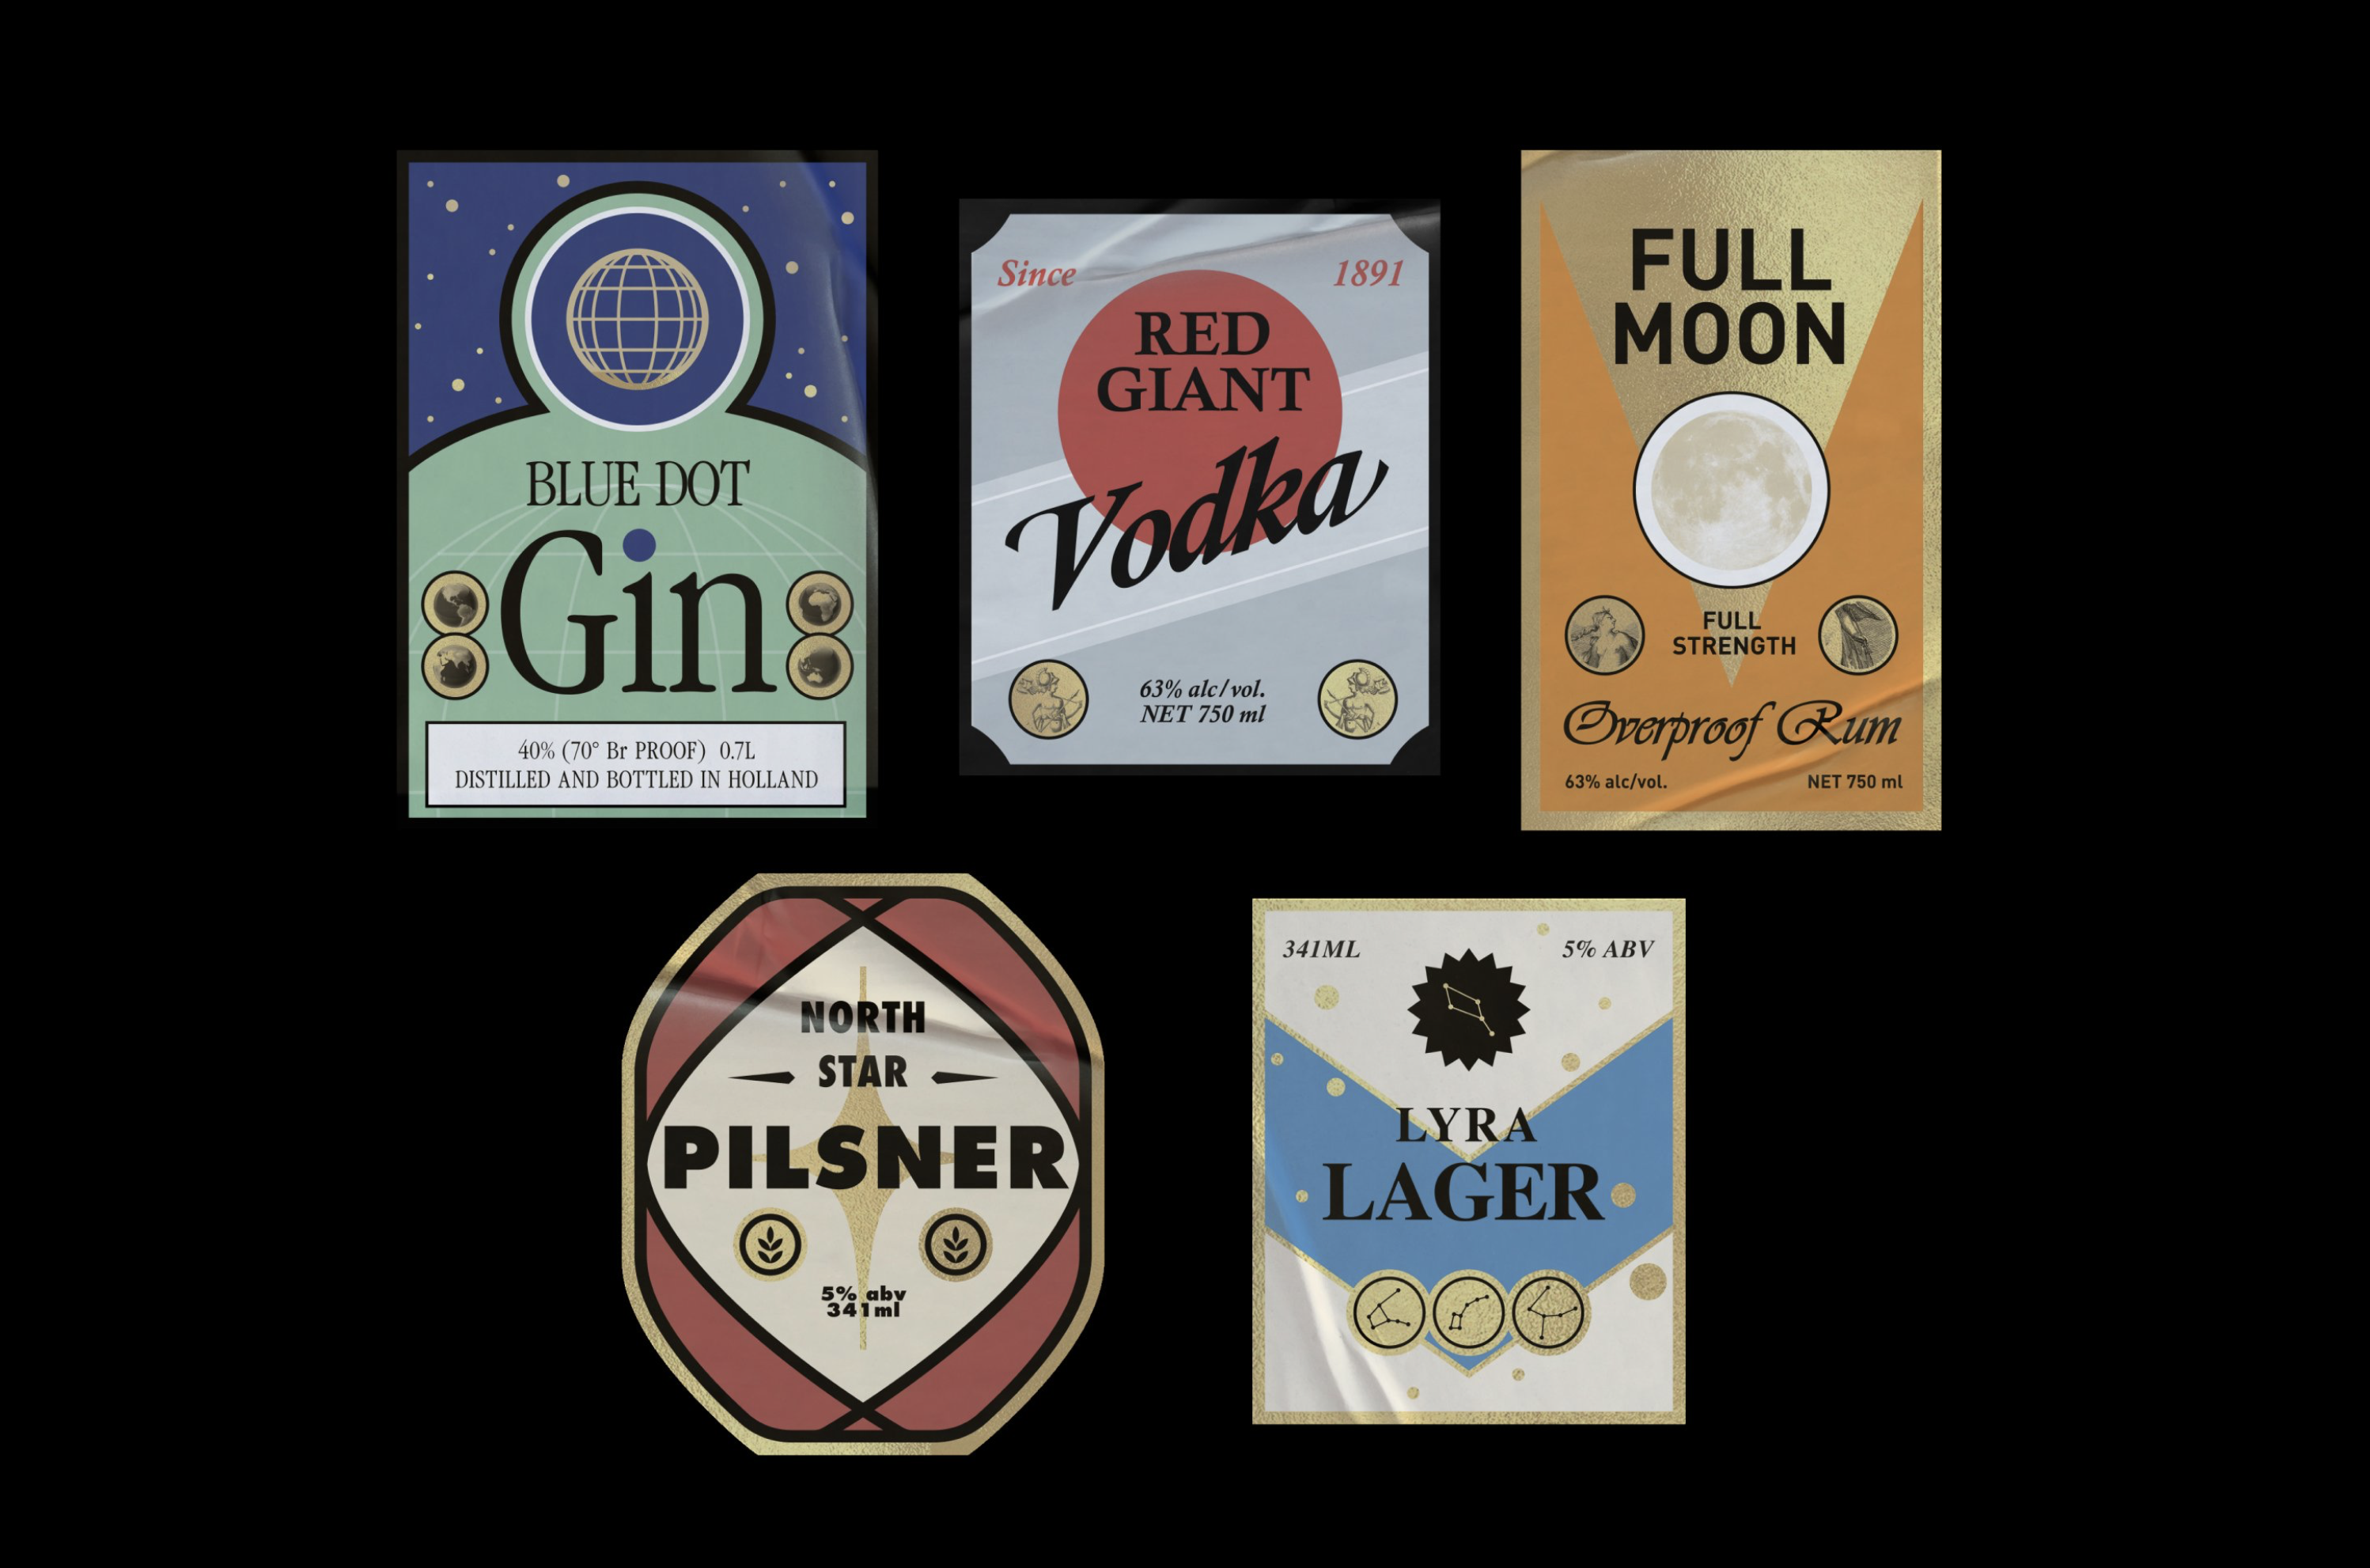 Liquor and beer labels used in the bar